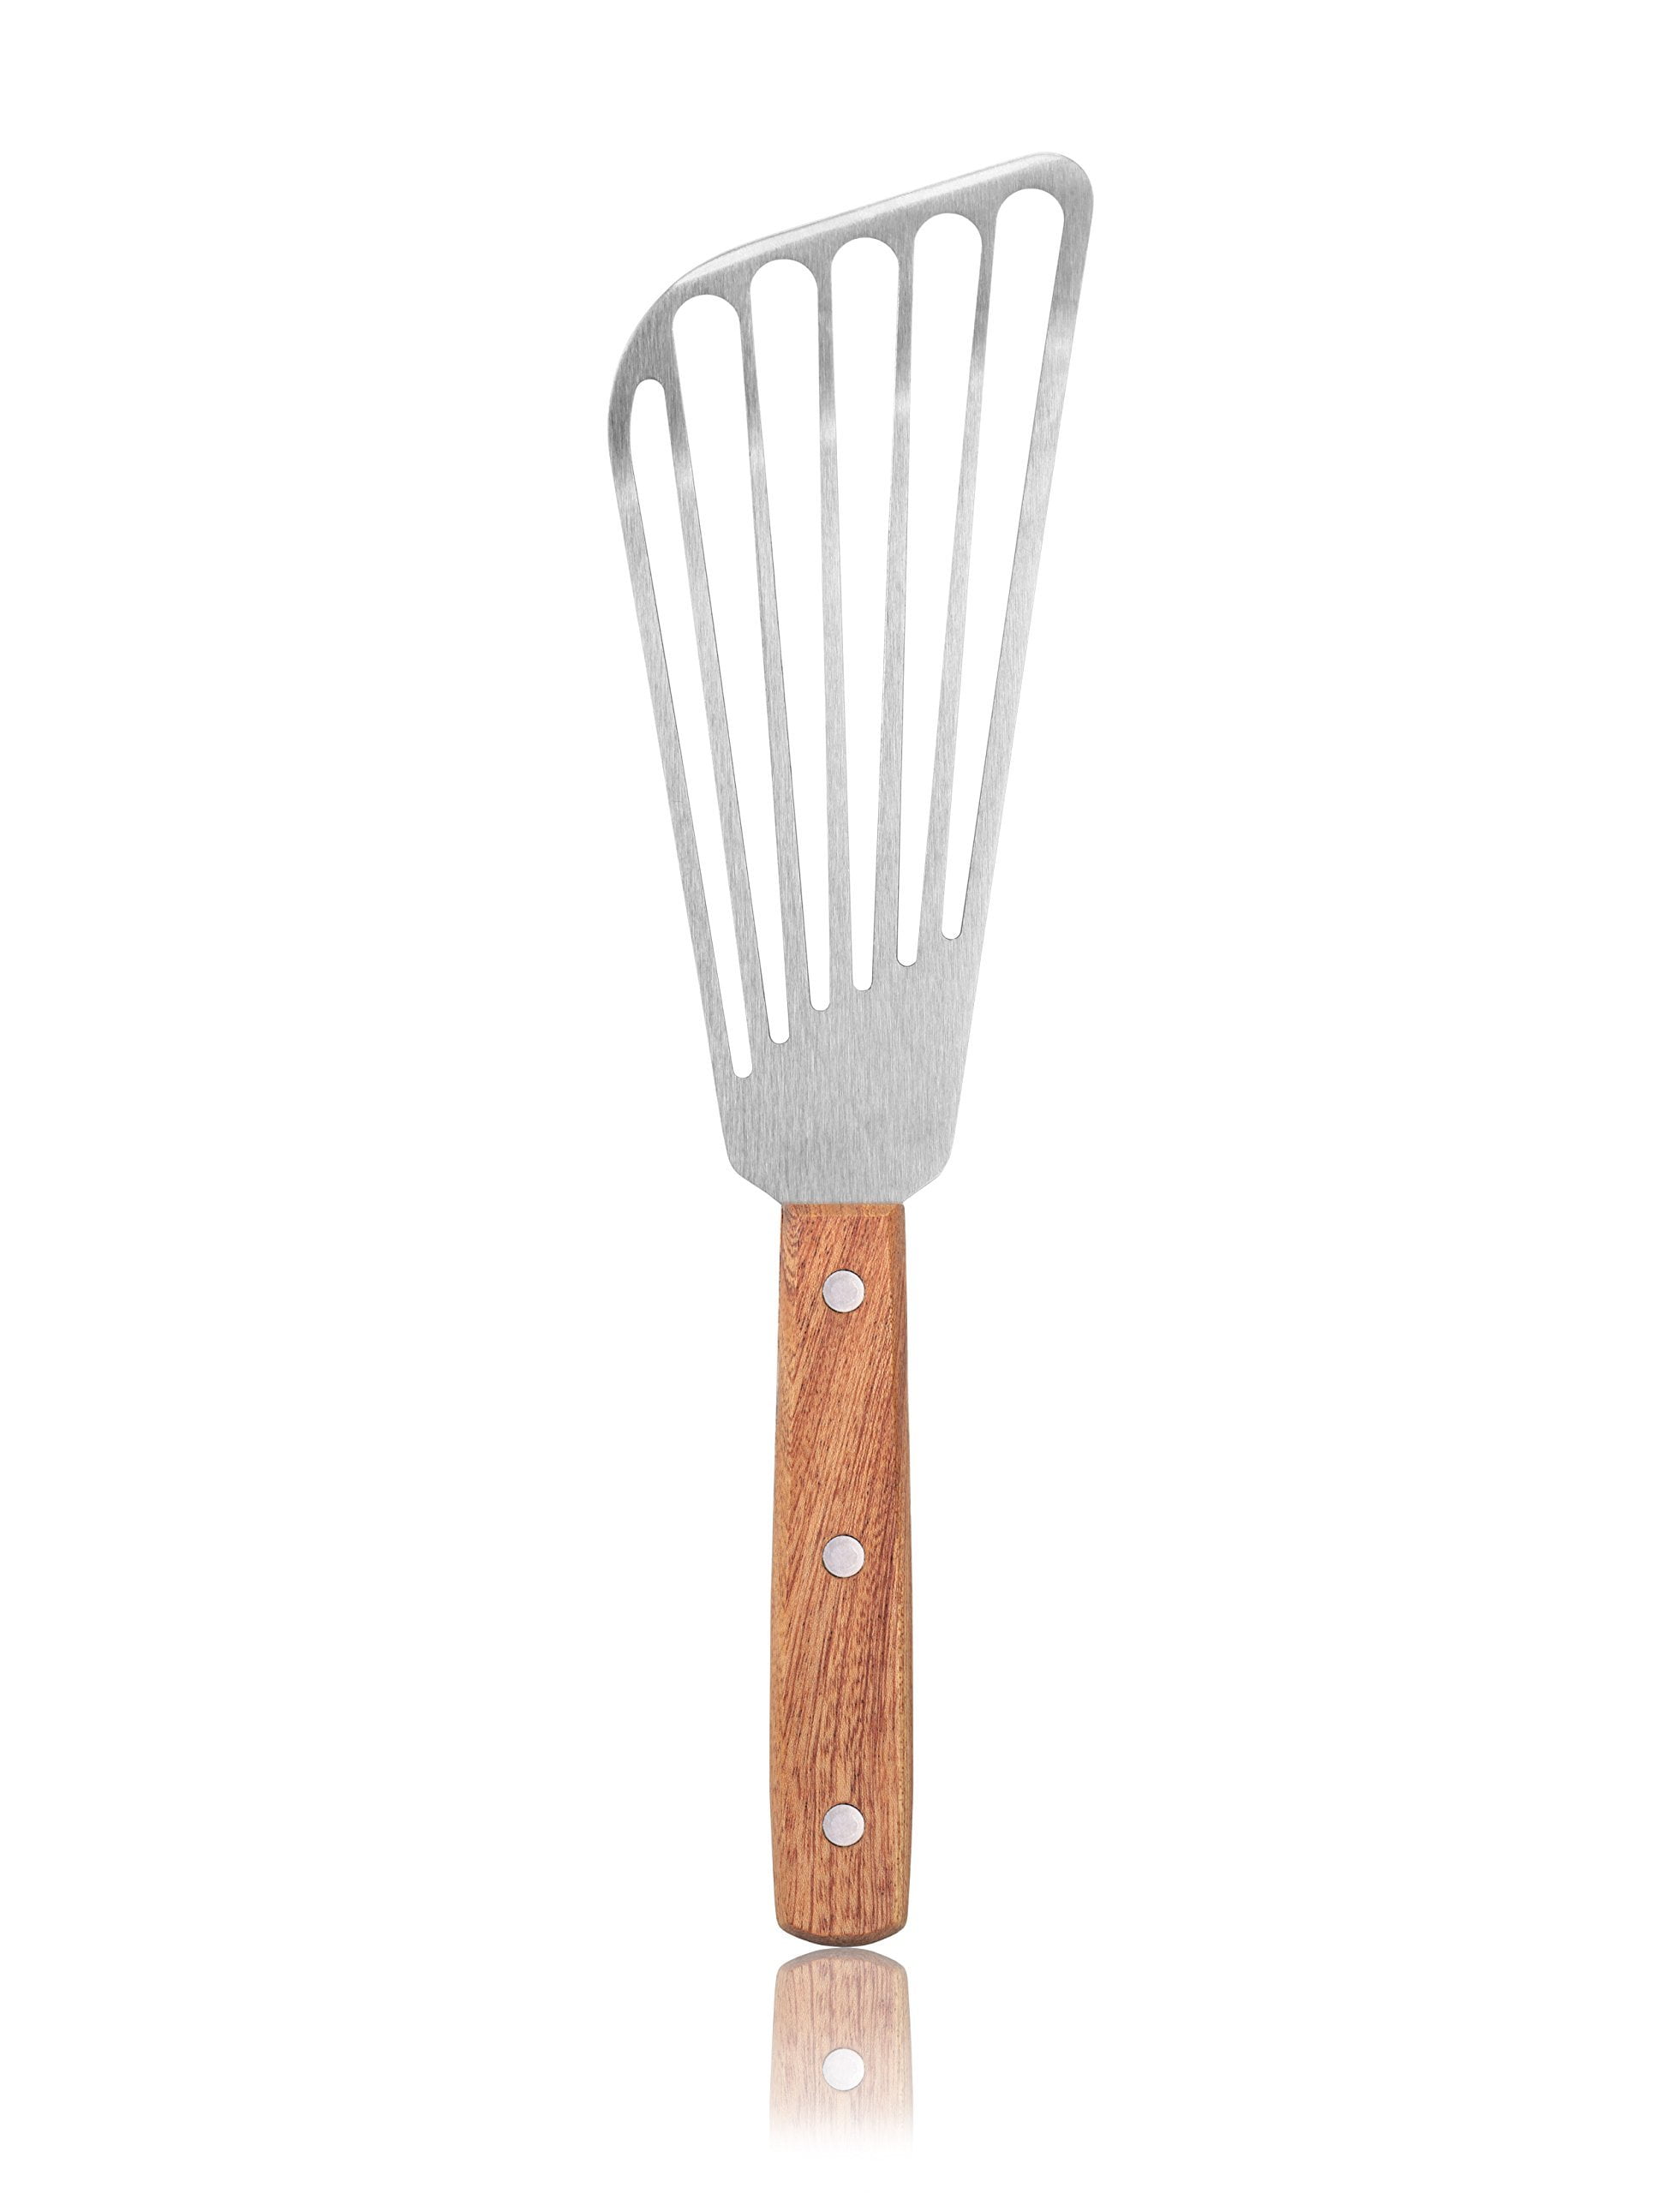 Authentic Vintage Flipper Spatula With Wood Handle / Stainless Steel Spatula  With Wooden Handle Made in Taiwan 